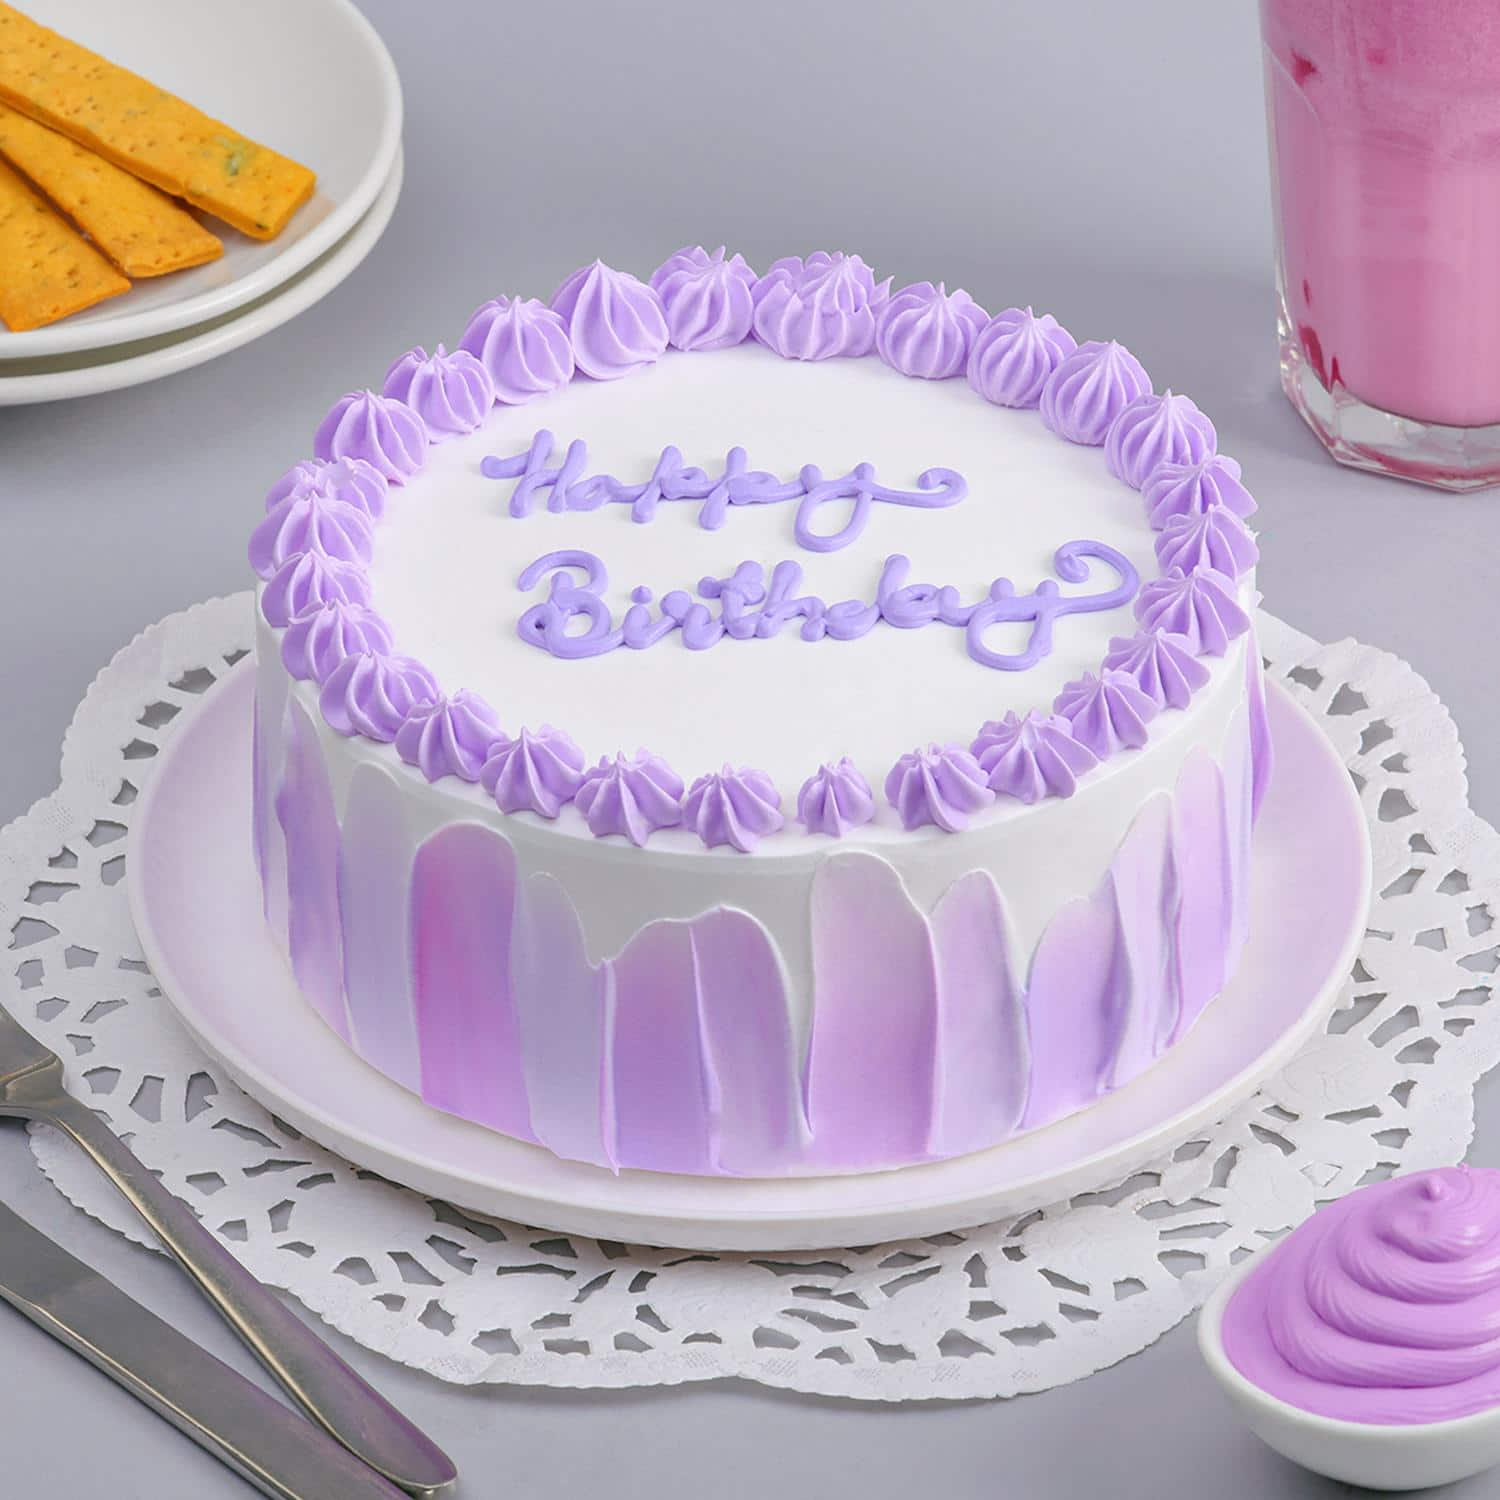 Birthday Cake Vintage Stock Photos and Images - 123RF